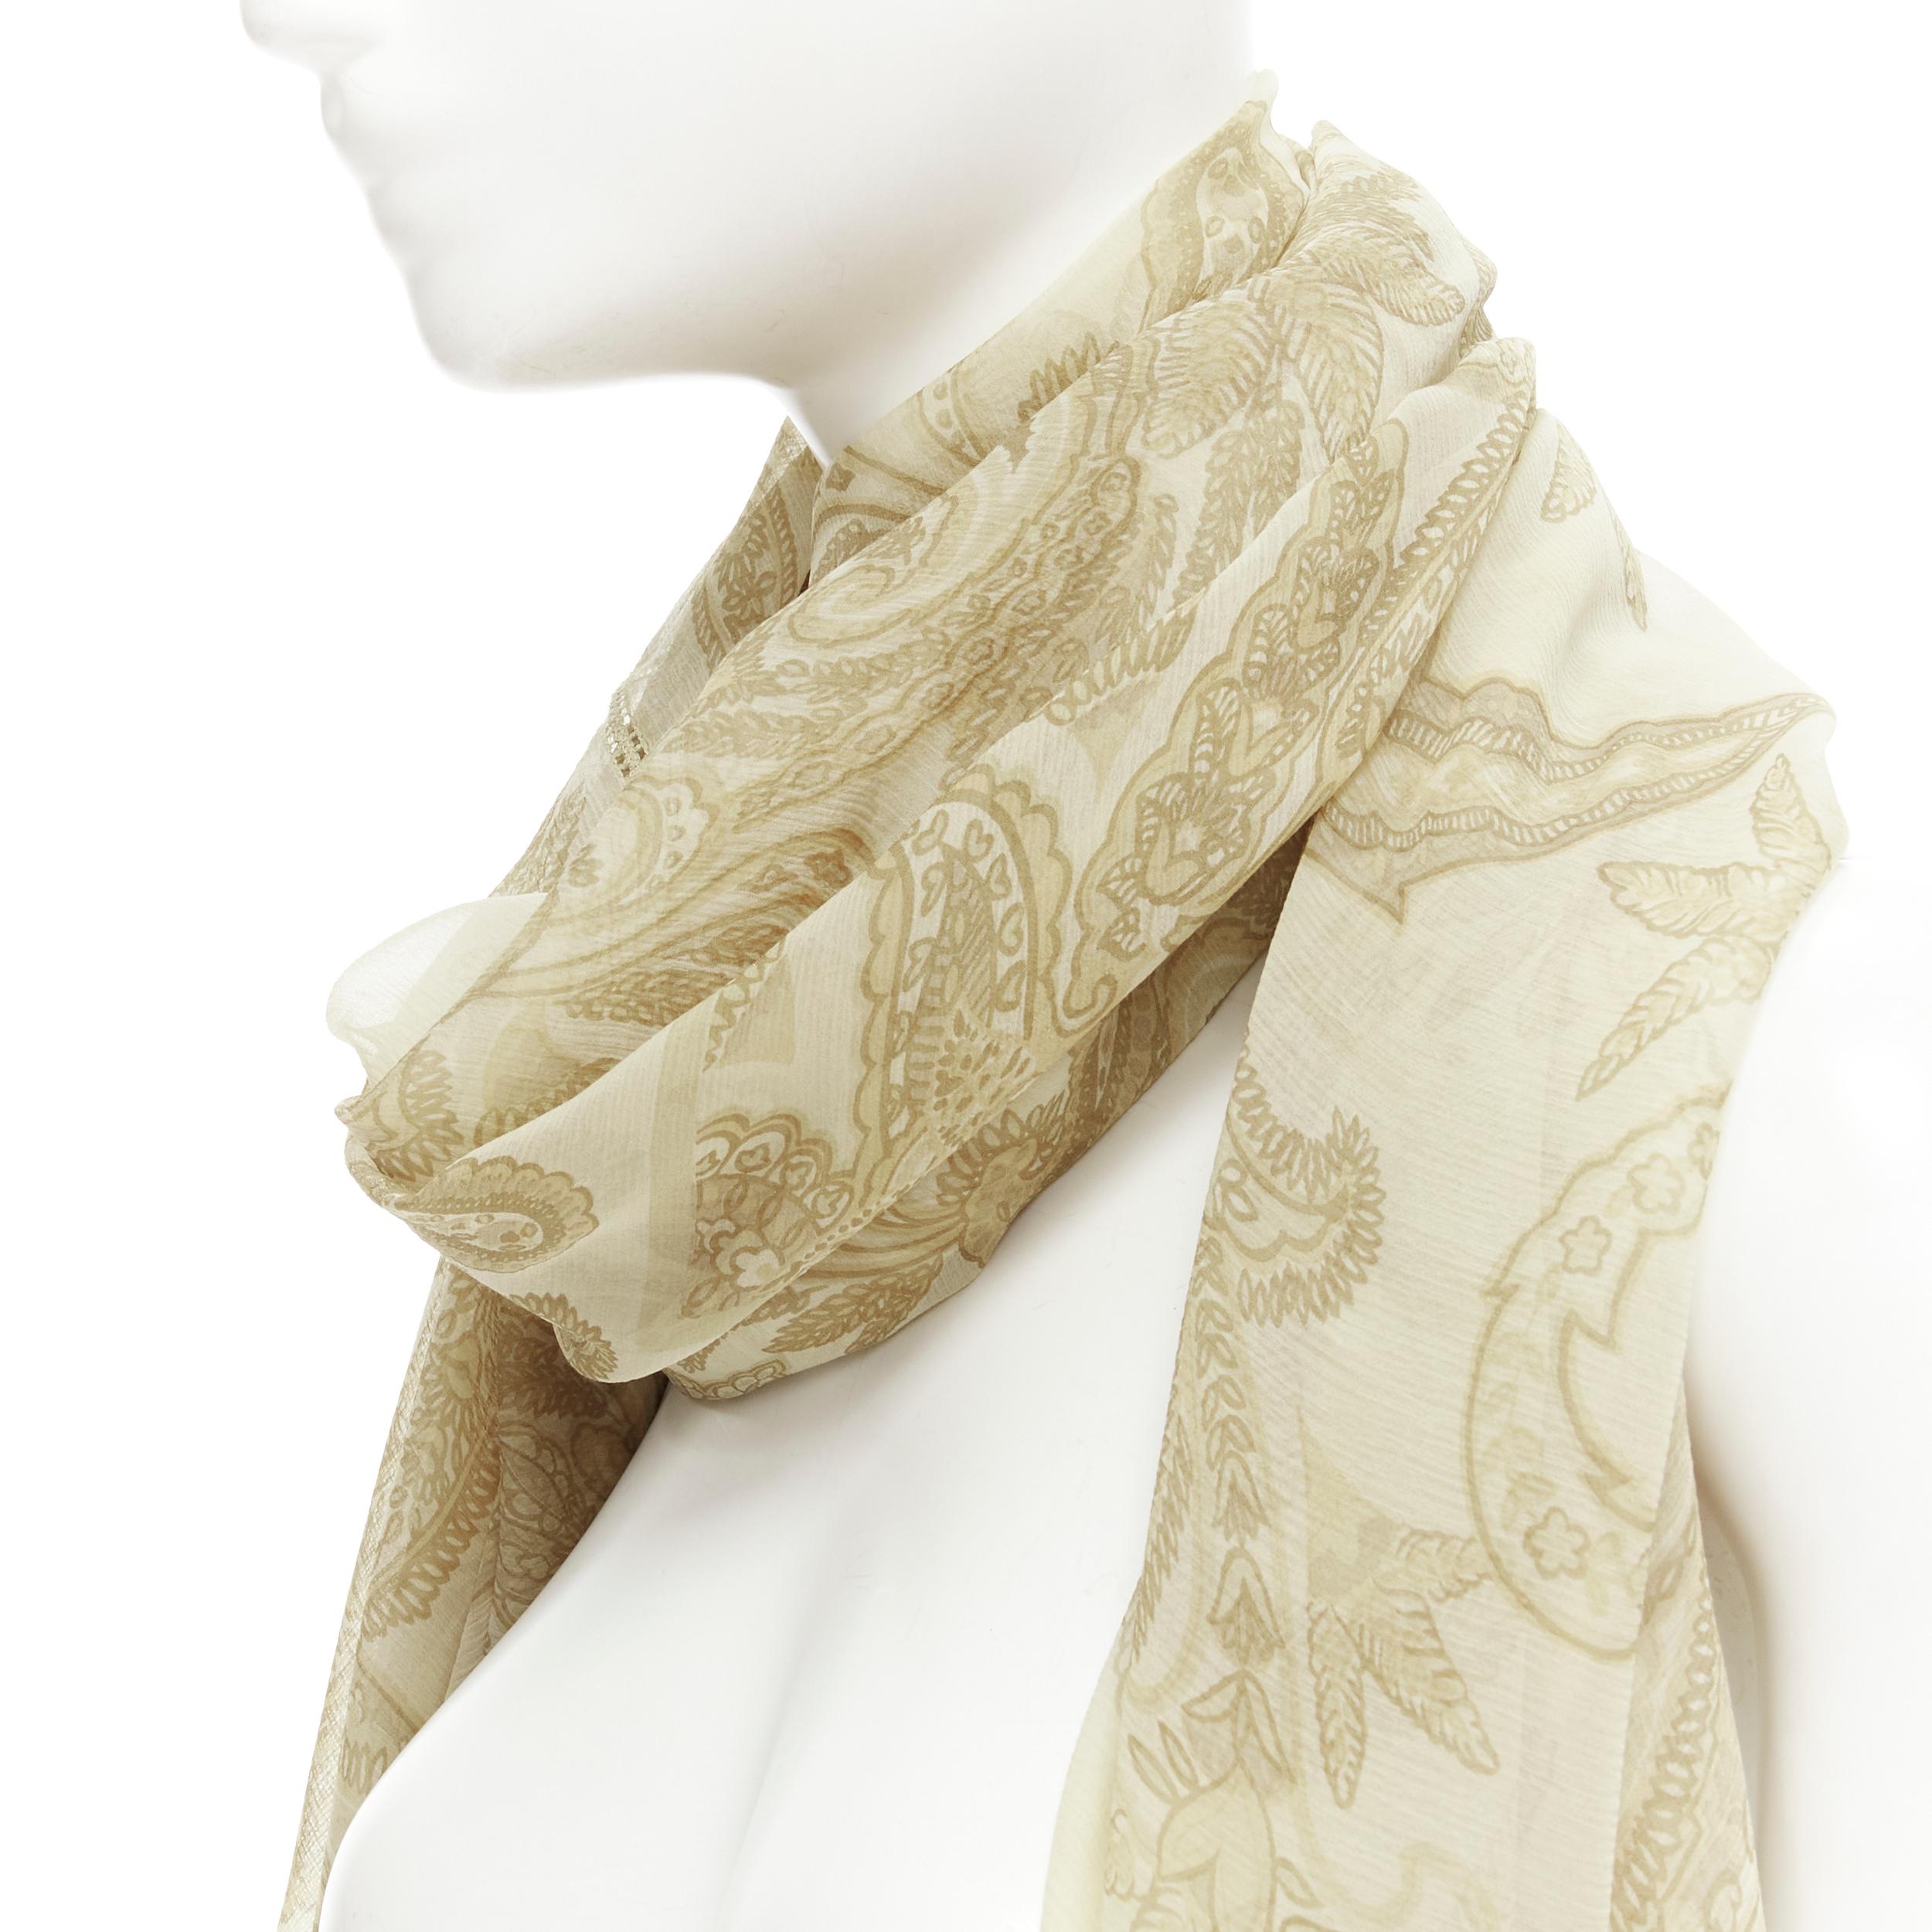 GIORGIO ARMANI 100% silk beige floral print sheer scarf 
Reference: AEMA/A00088 
Brand: Giorgio Armani 
Material: Silk 
Color: Beige 
Pattern: Floral 
Extra Detail: Ladder seam along edge. 
Made in: Italy 

CONDITION: 
Condition: Excellent, this